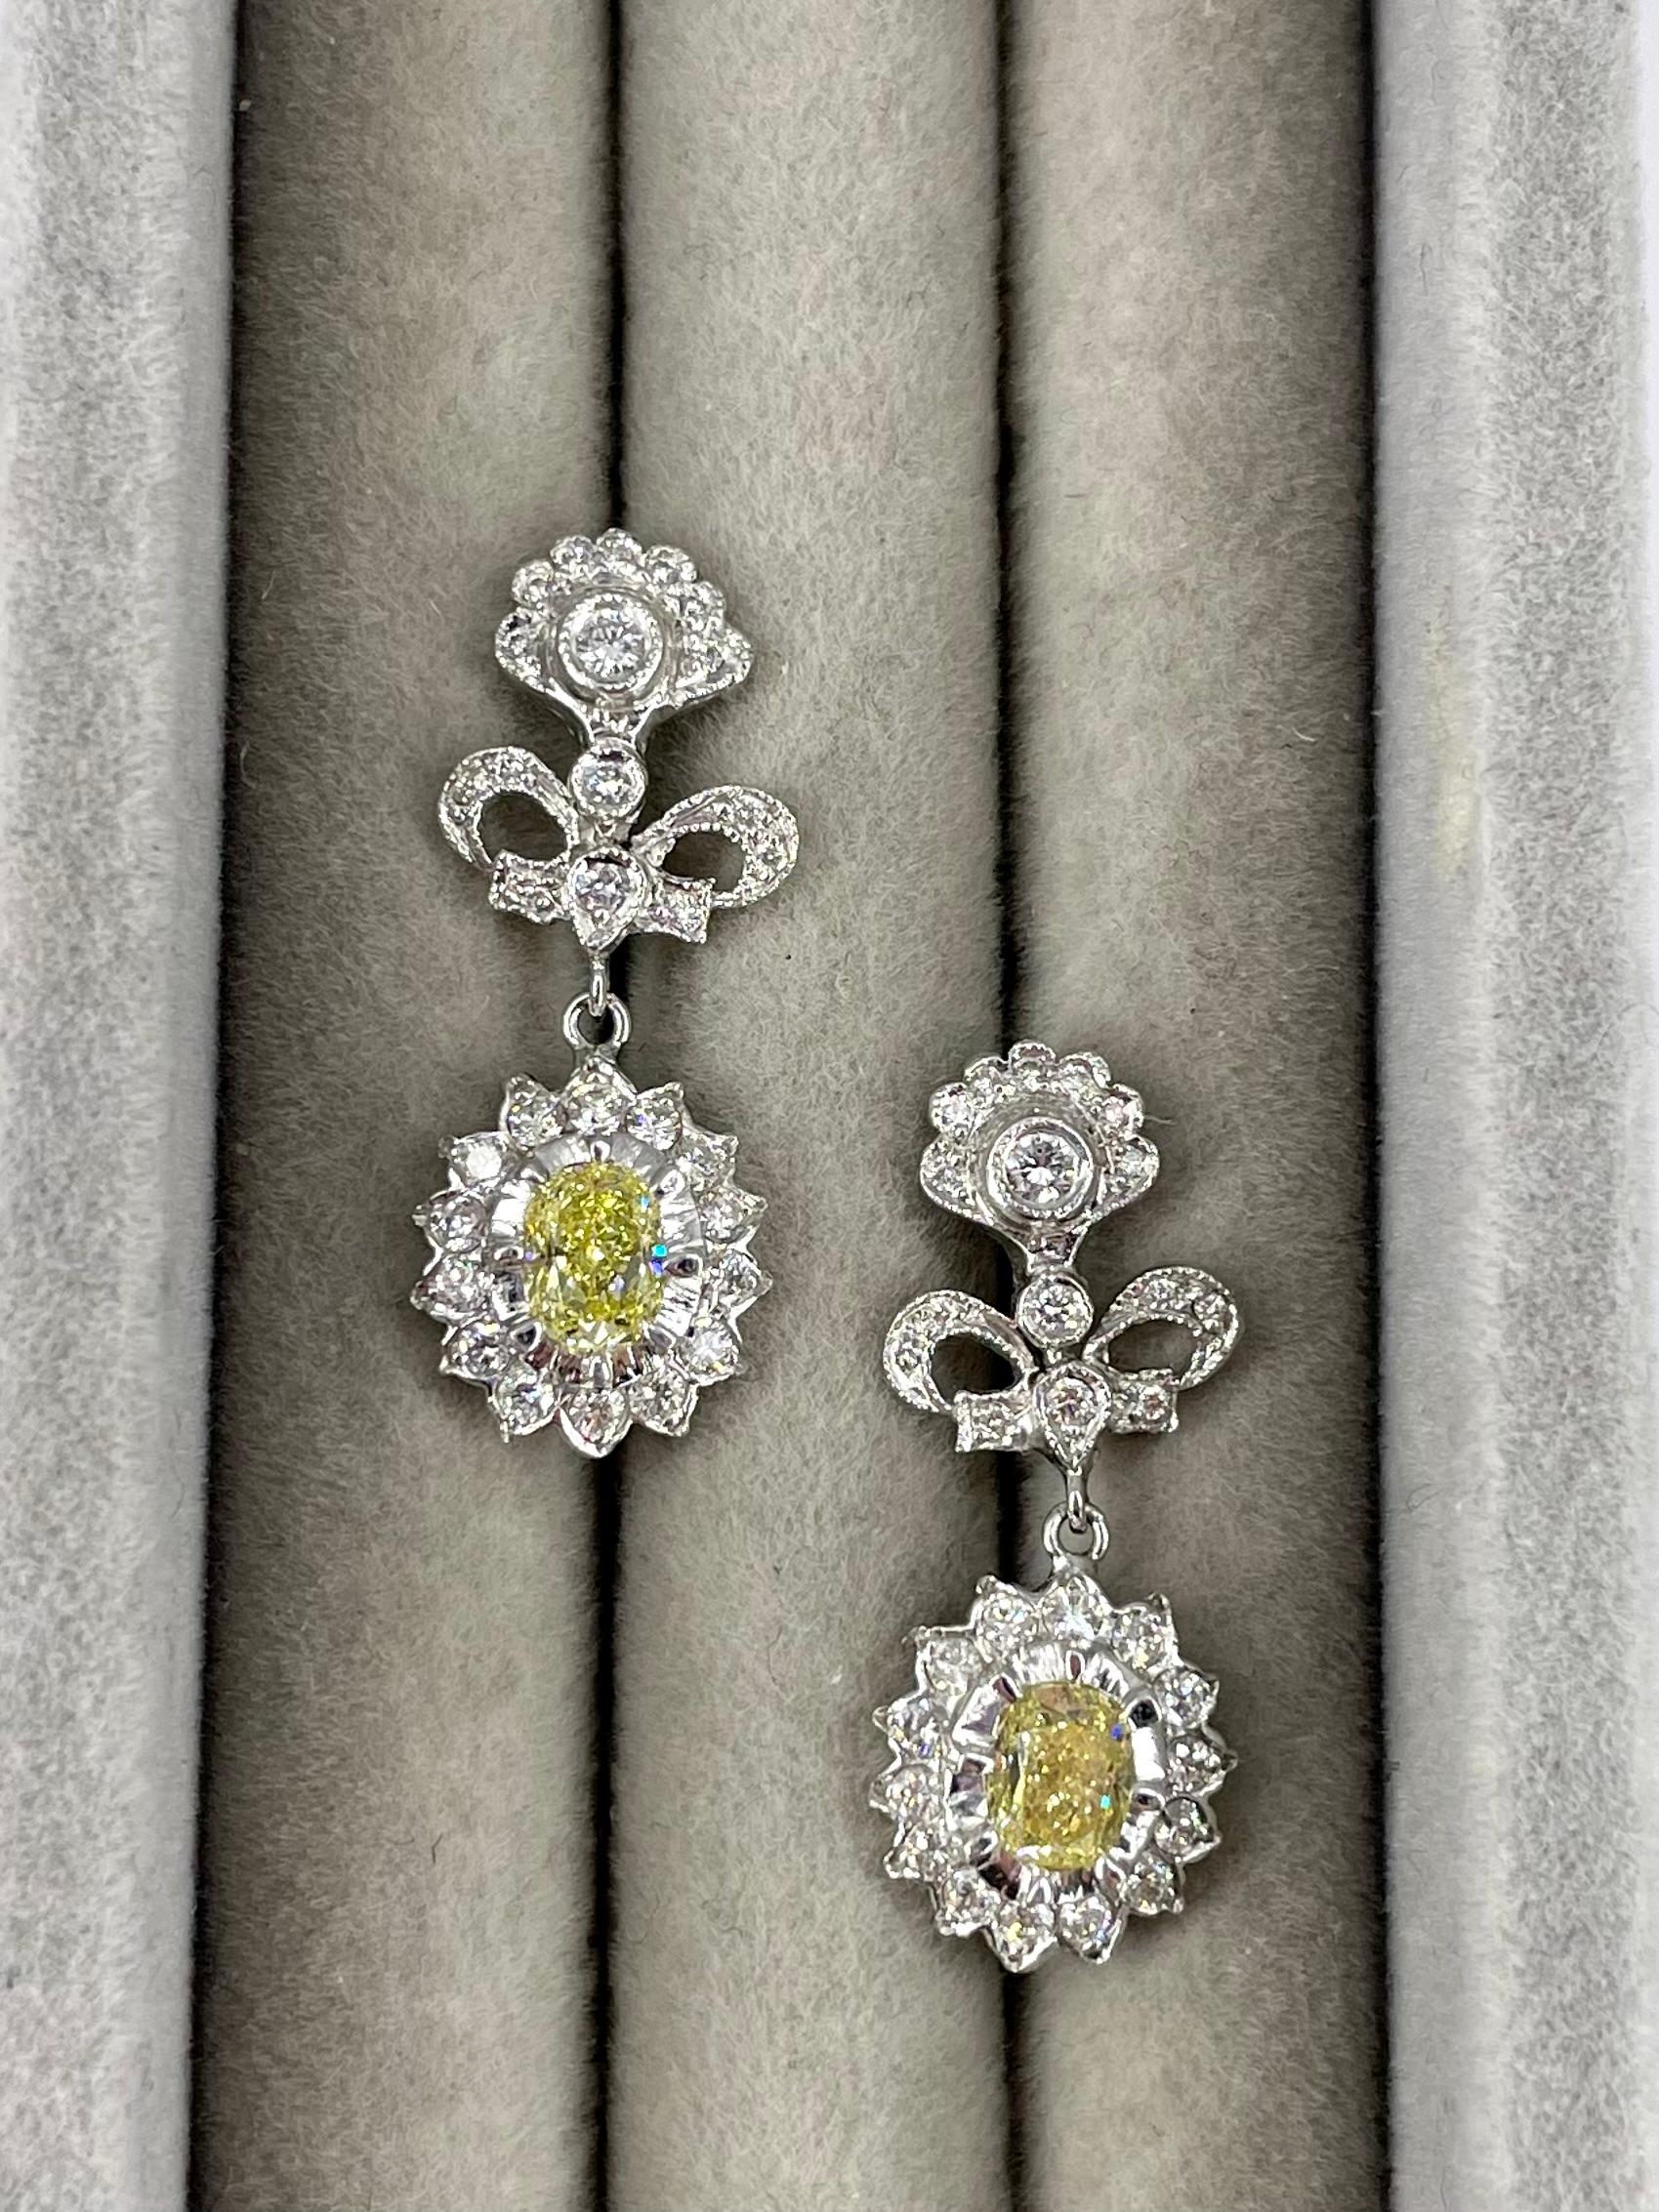 These charming antique style earrings by Cathy Carmendy are a sweet, feminine design full of unique details. The craftsmanship of these earrings makes them a truly special addition to any jewelry collection. The two fancy yellow oval diamonds total